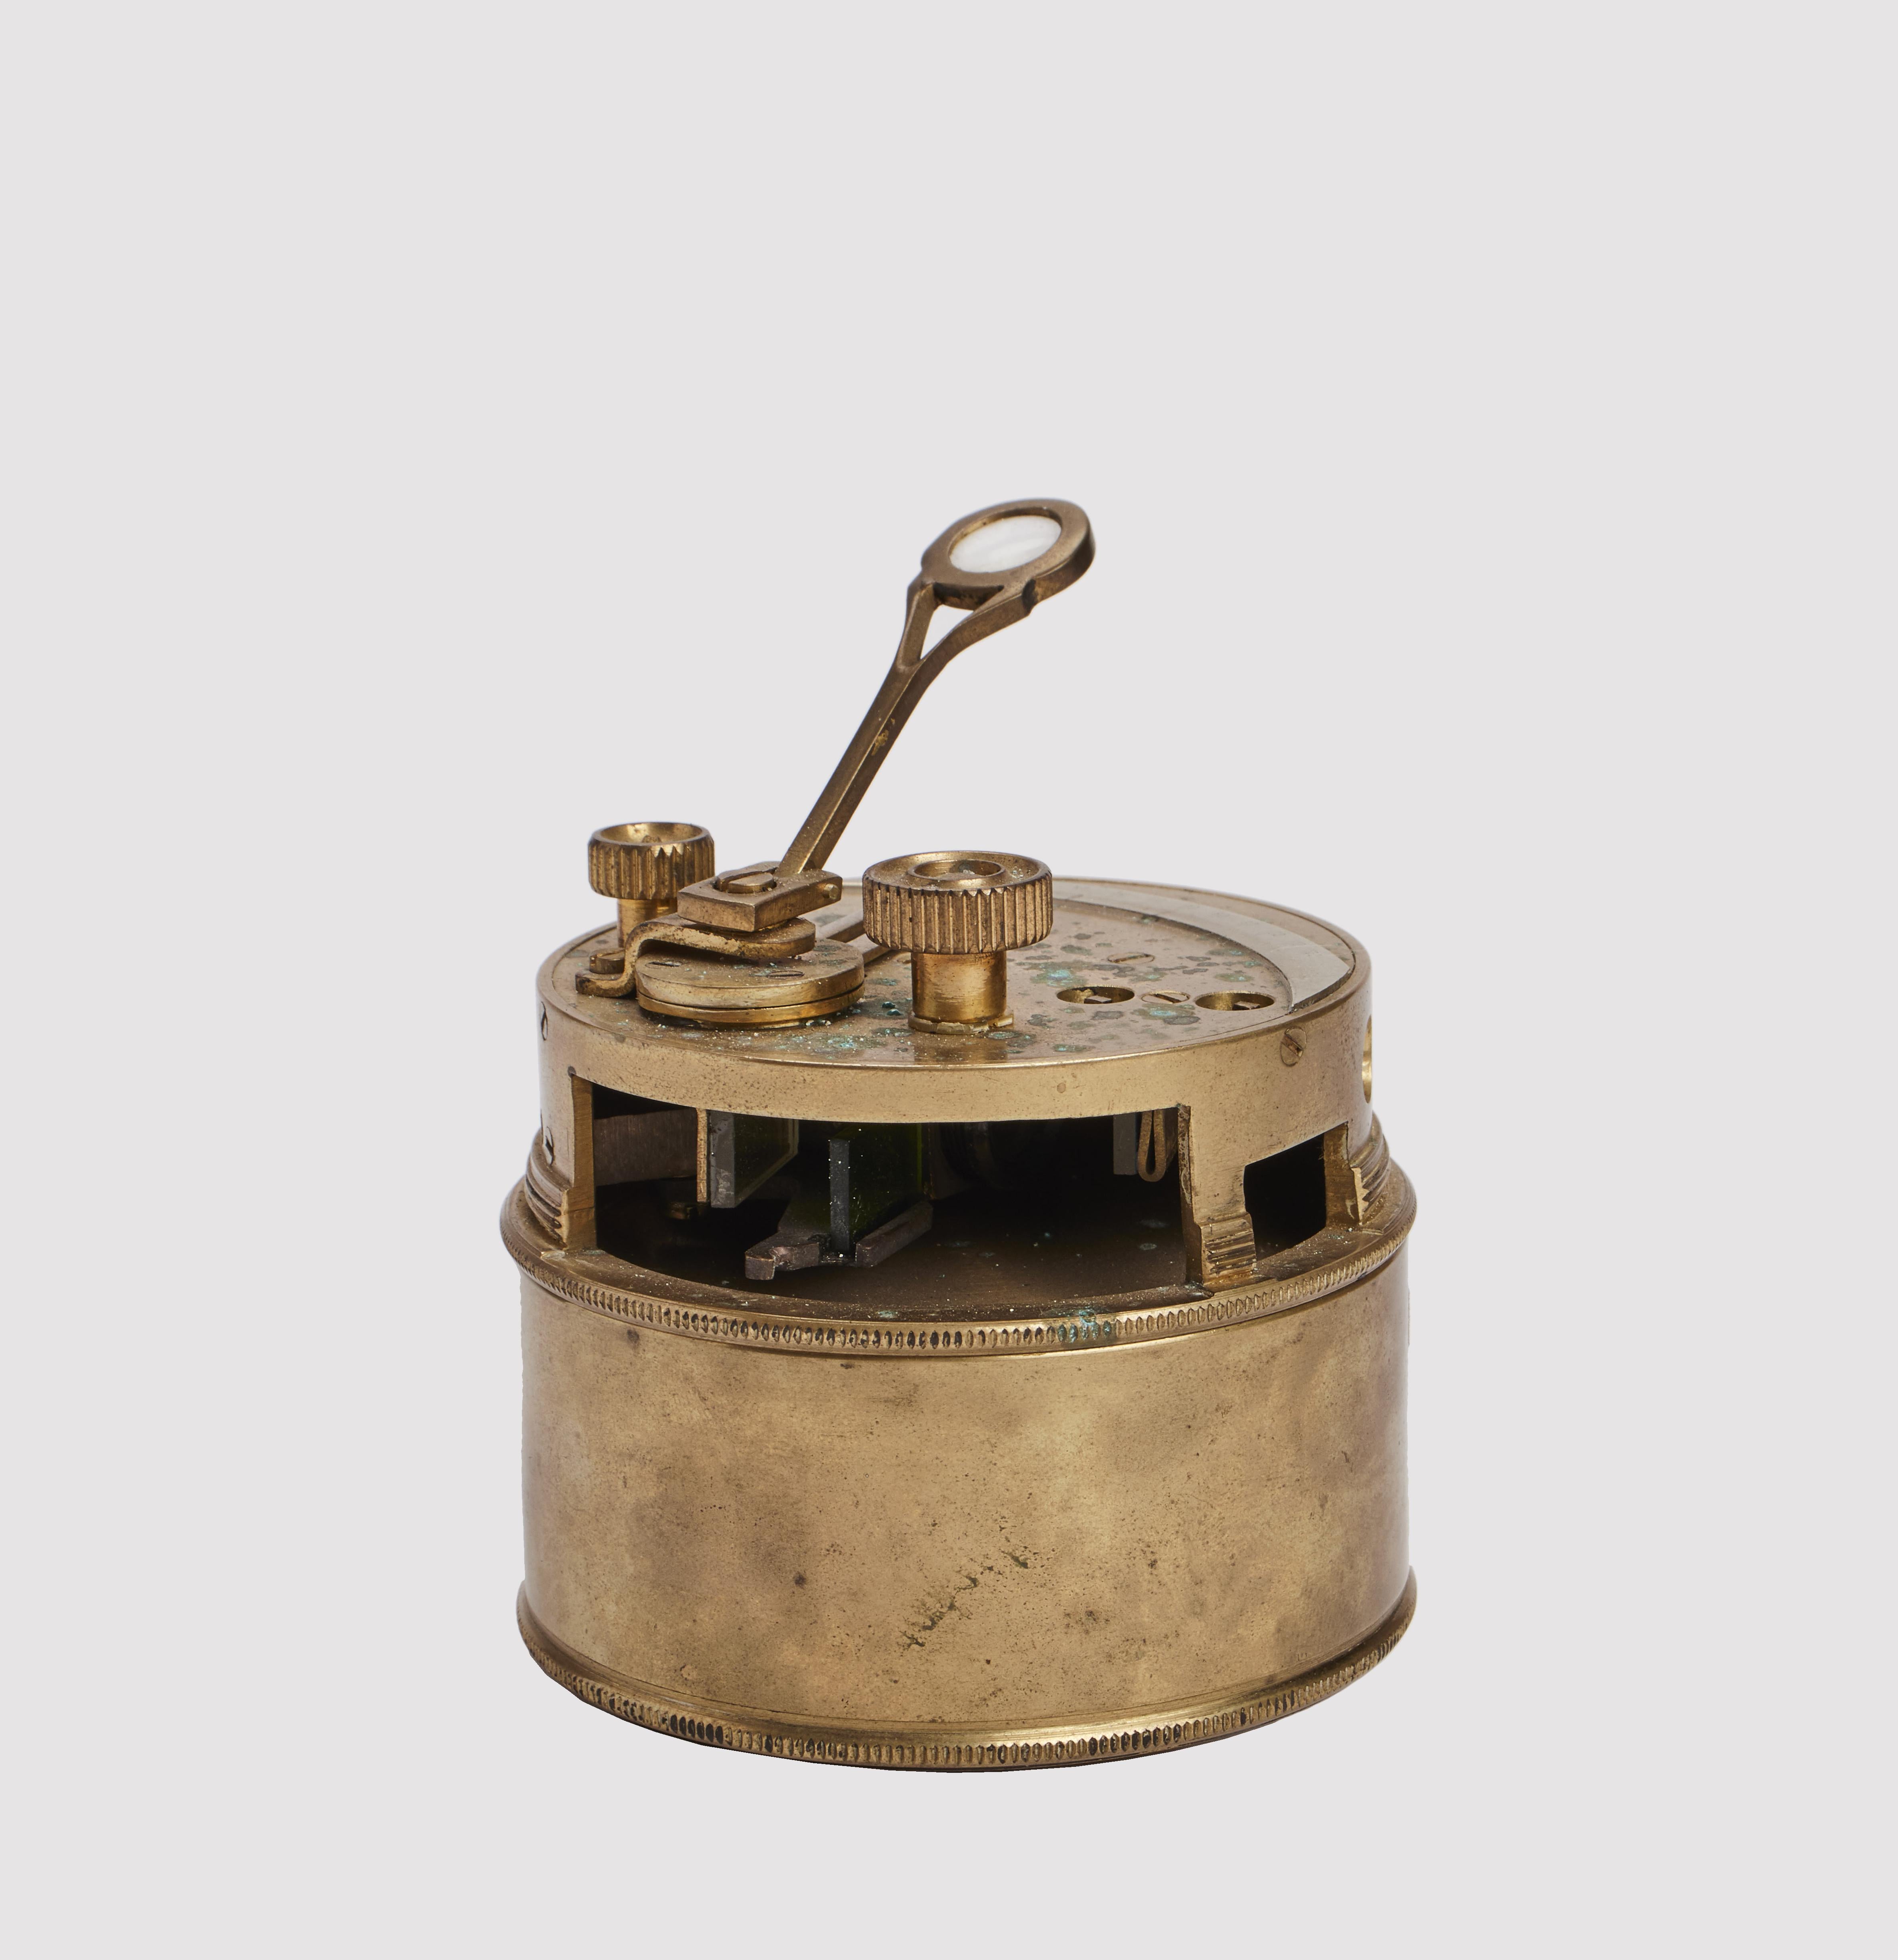 A travel nautical instrument, sextant, to determine the ship’s position. The cover became the base of it. Signed Stanley, London, England circa 1890.